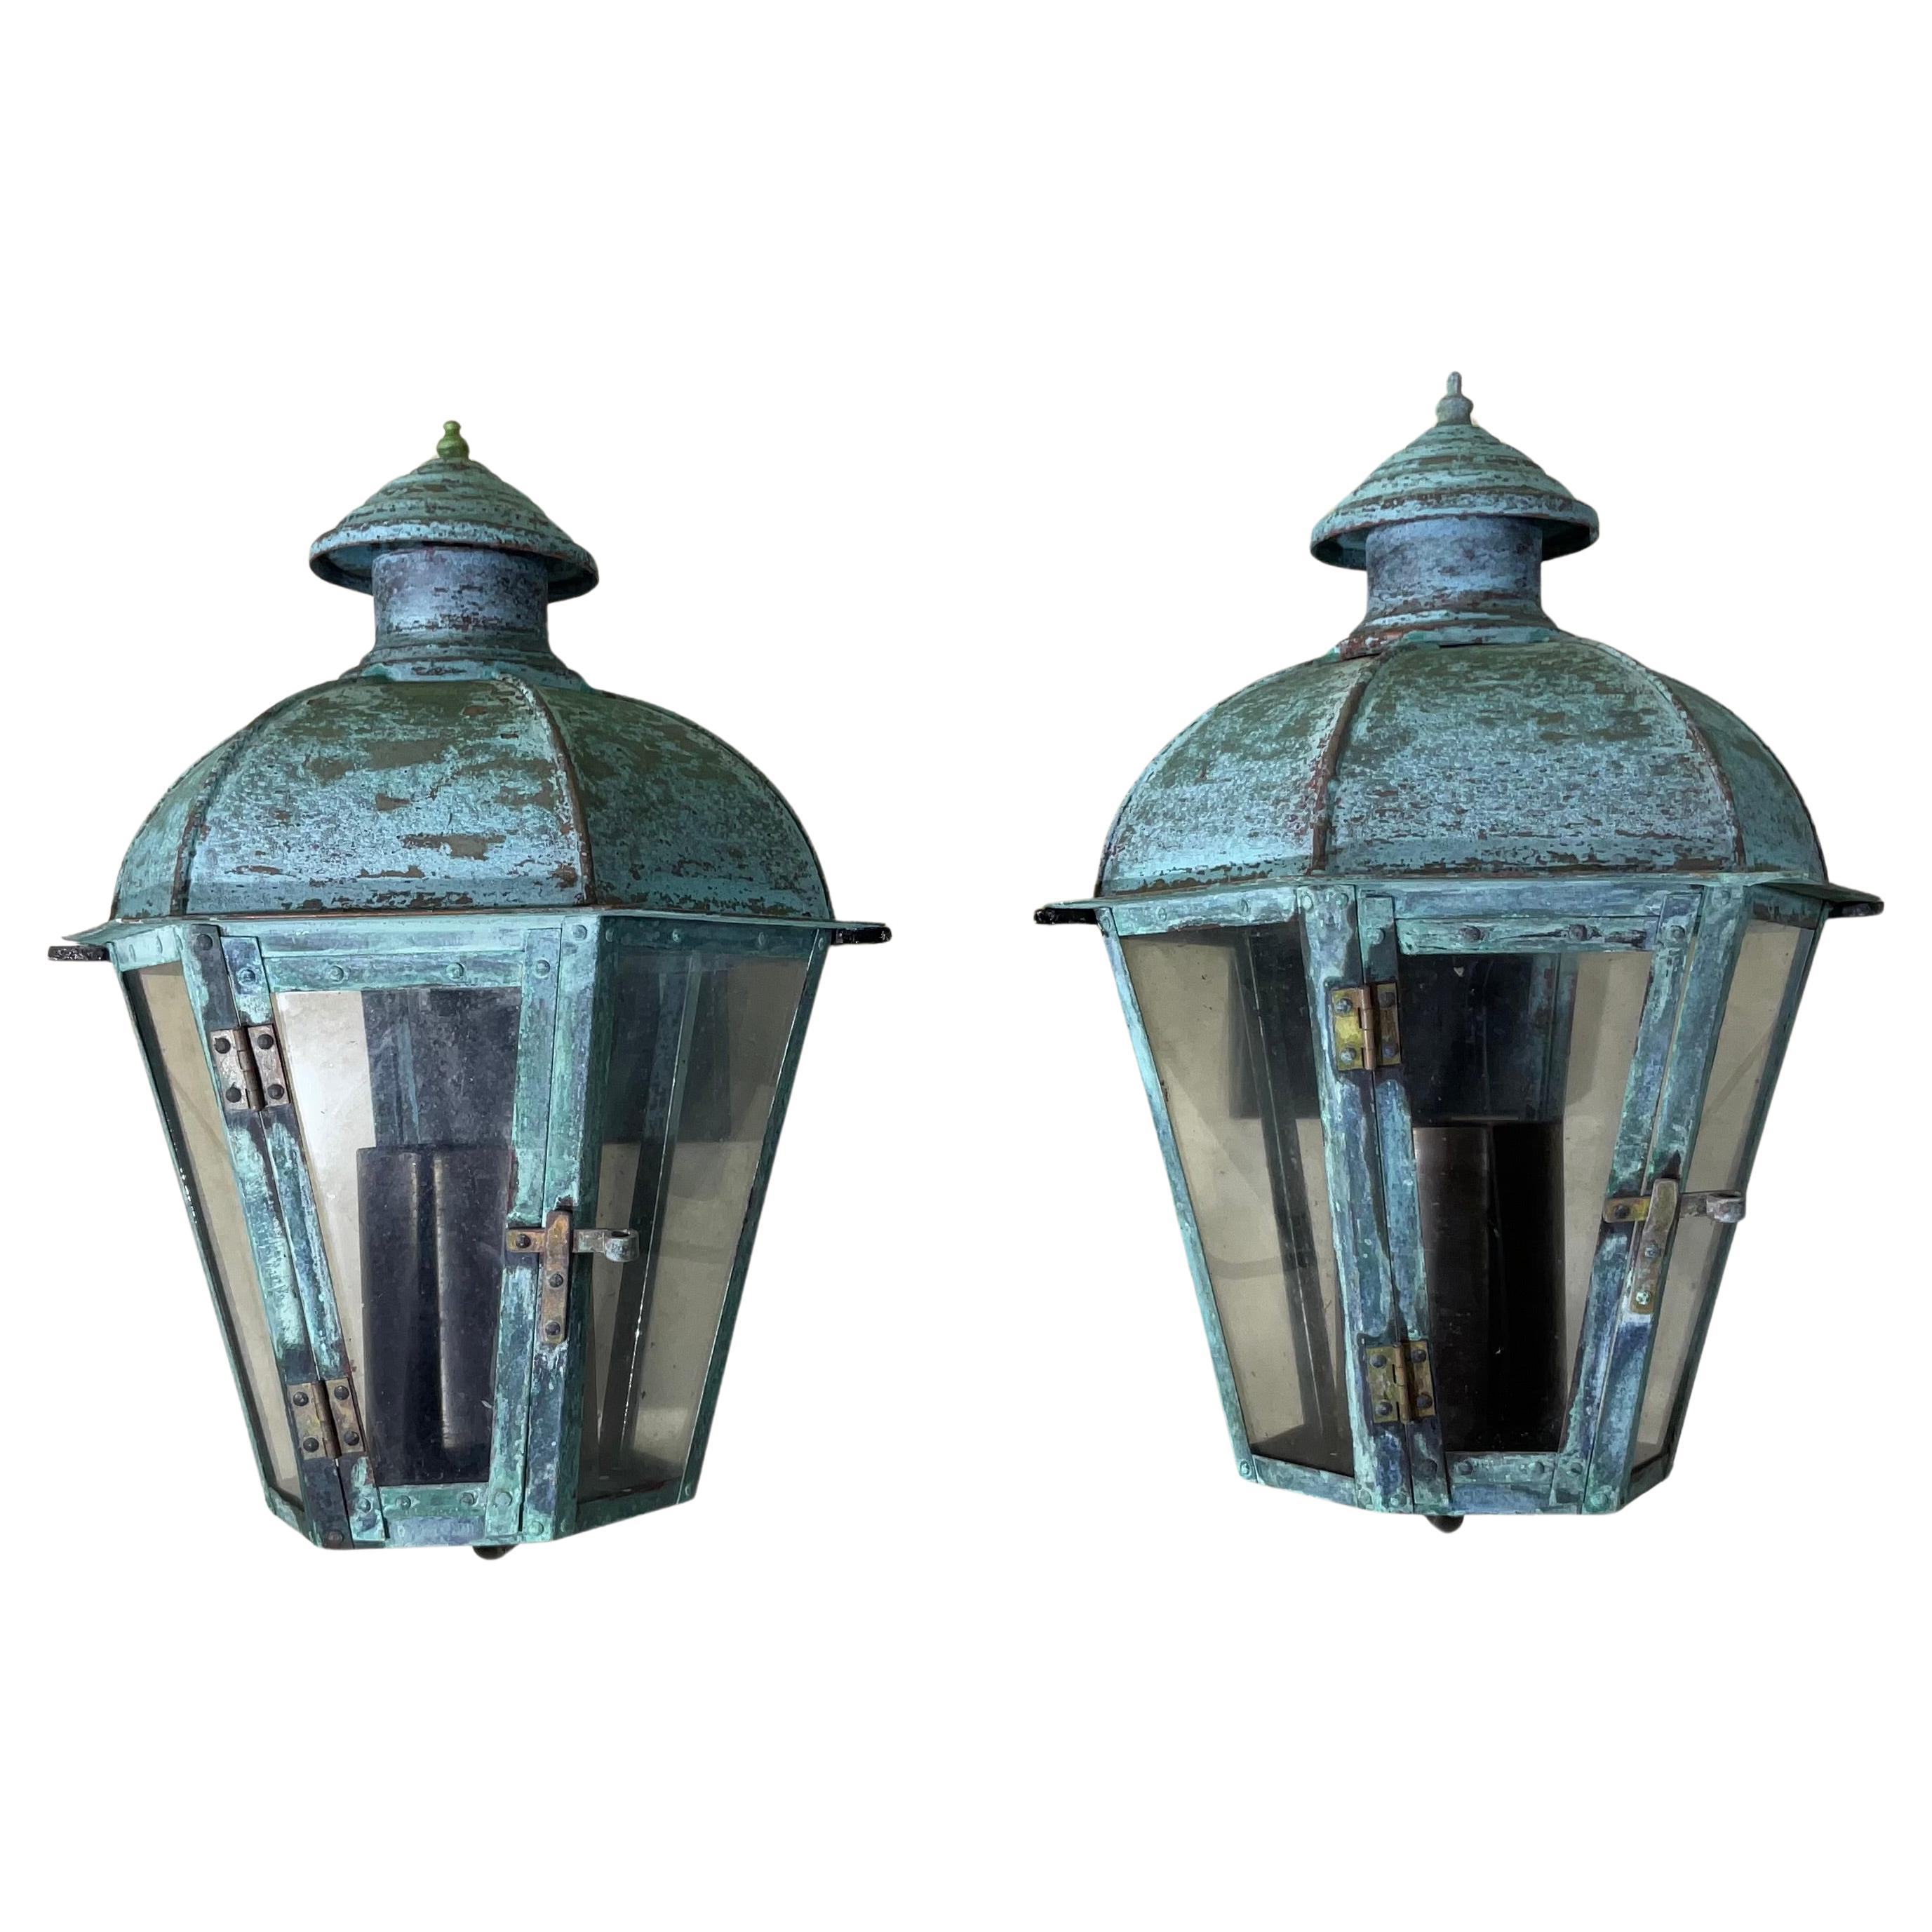 Pair of Vintage Wall Hanging Solid Copper Lantern